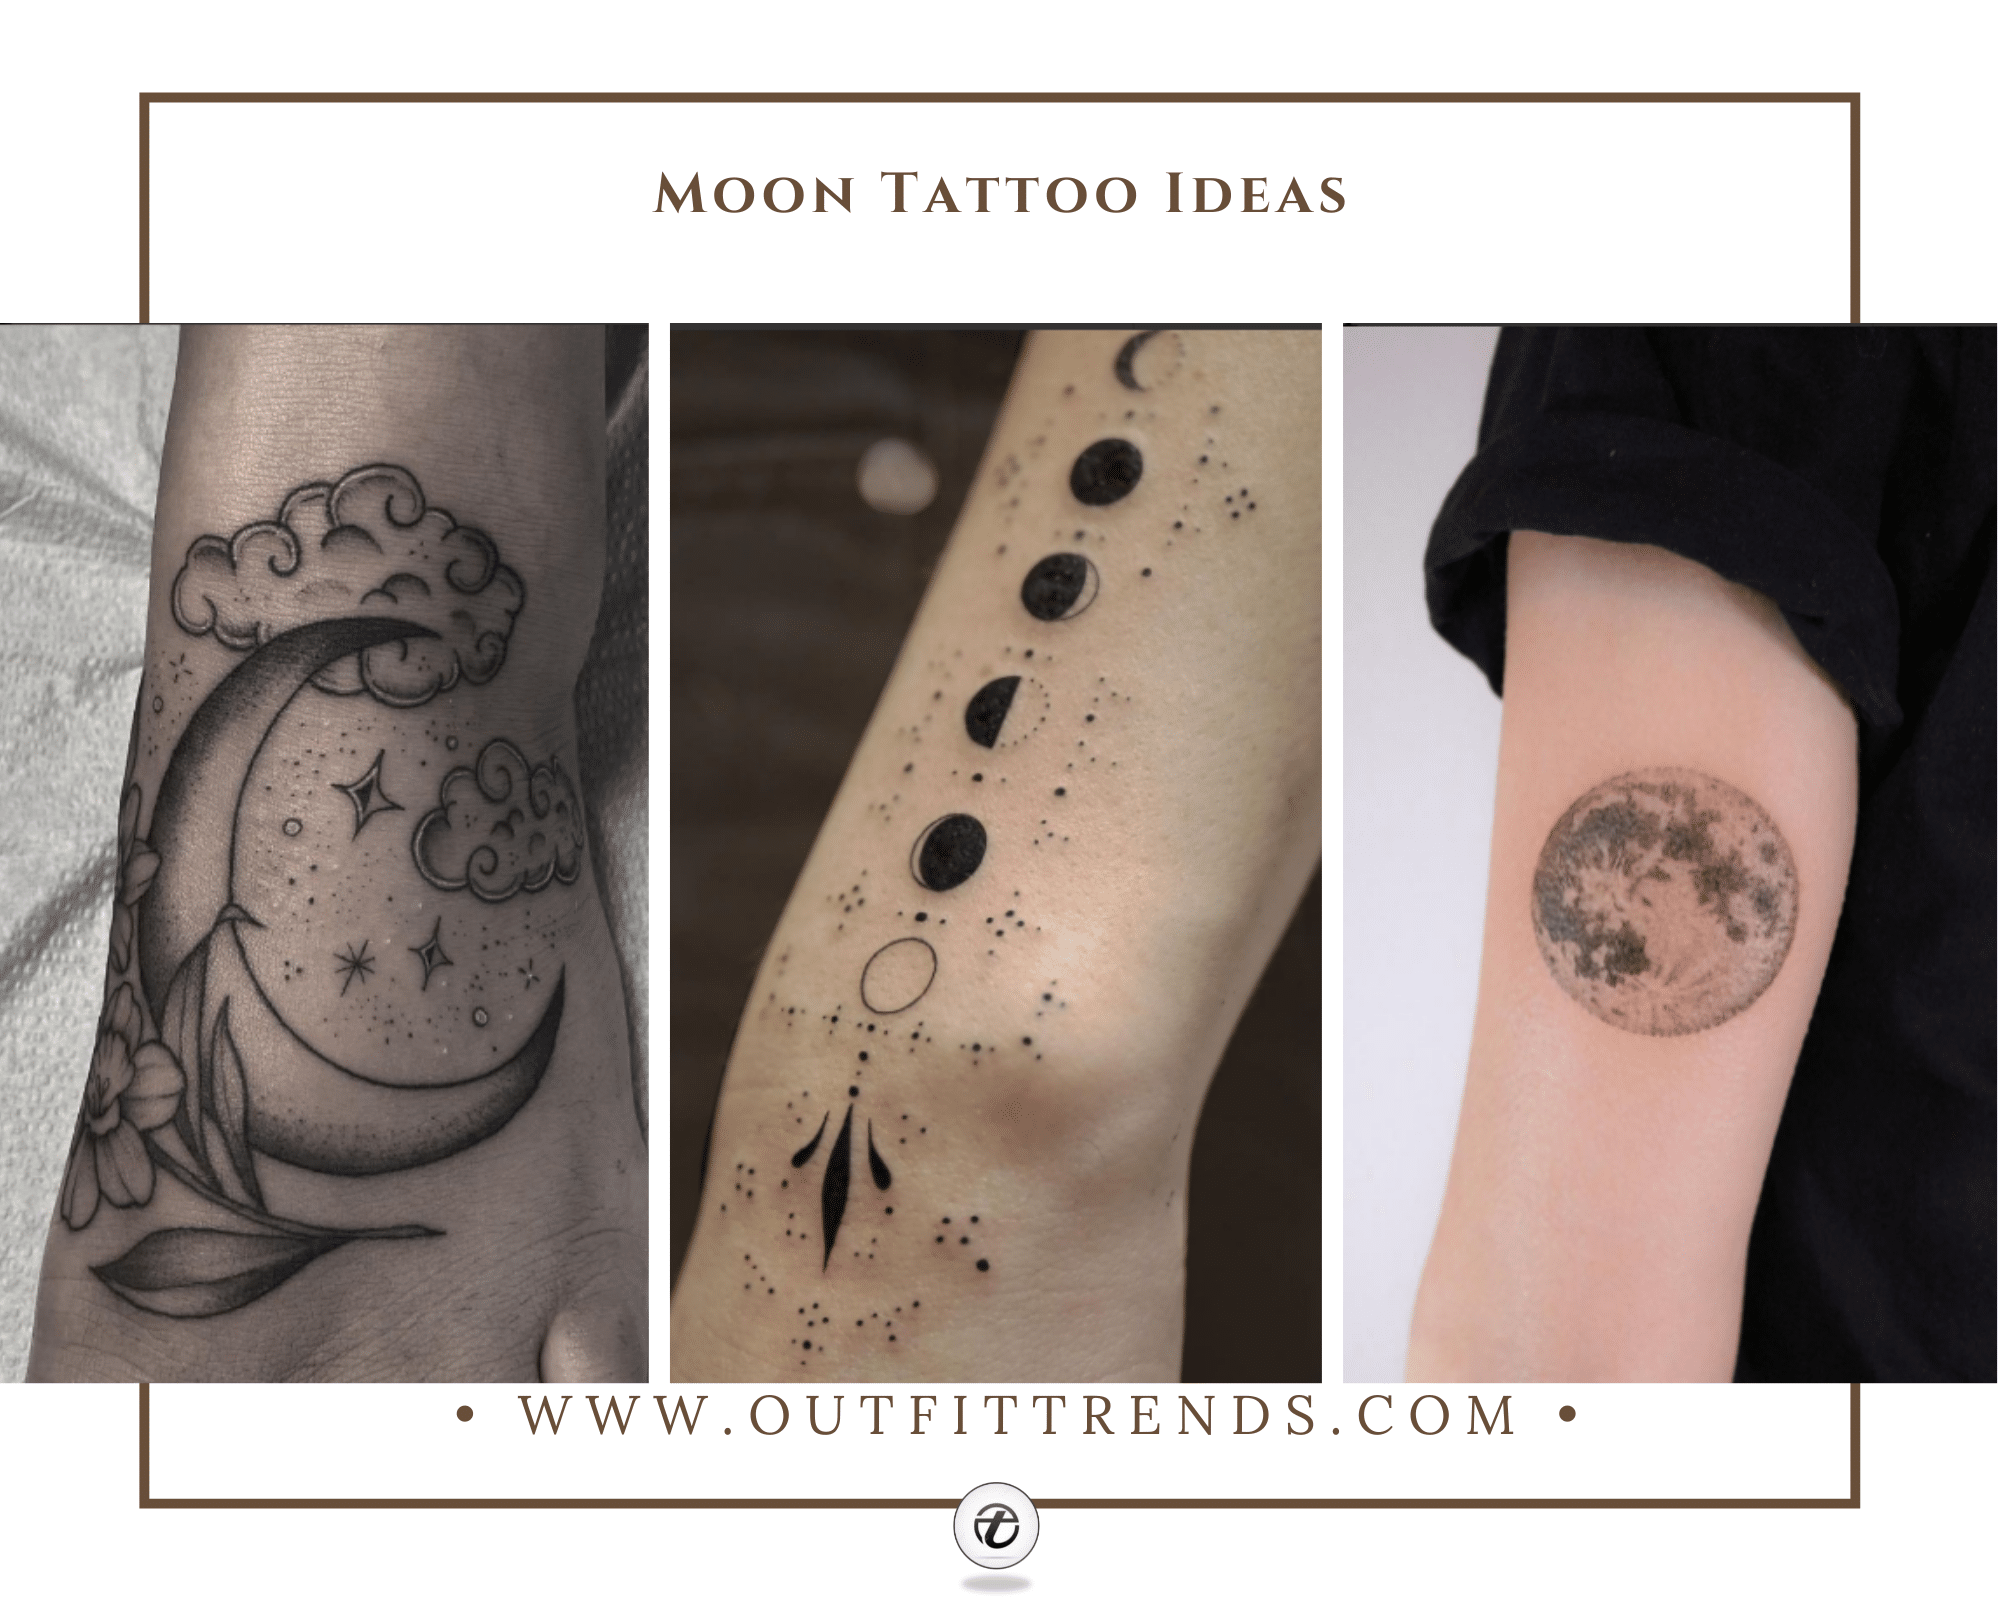 katharine on Twitter Five Solid Evidences Attending Sun Moon And Stars  Tattoo Meaning Is Good For Your Career Development  sun moon and stars  tattoo meaning  sun moon and stars tattoo